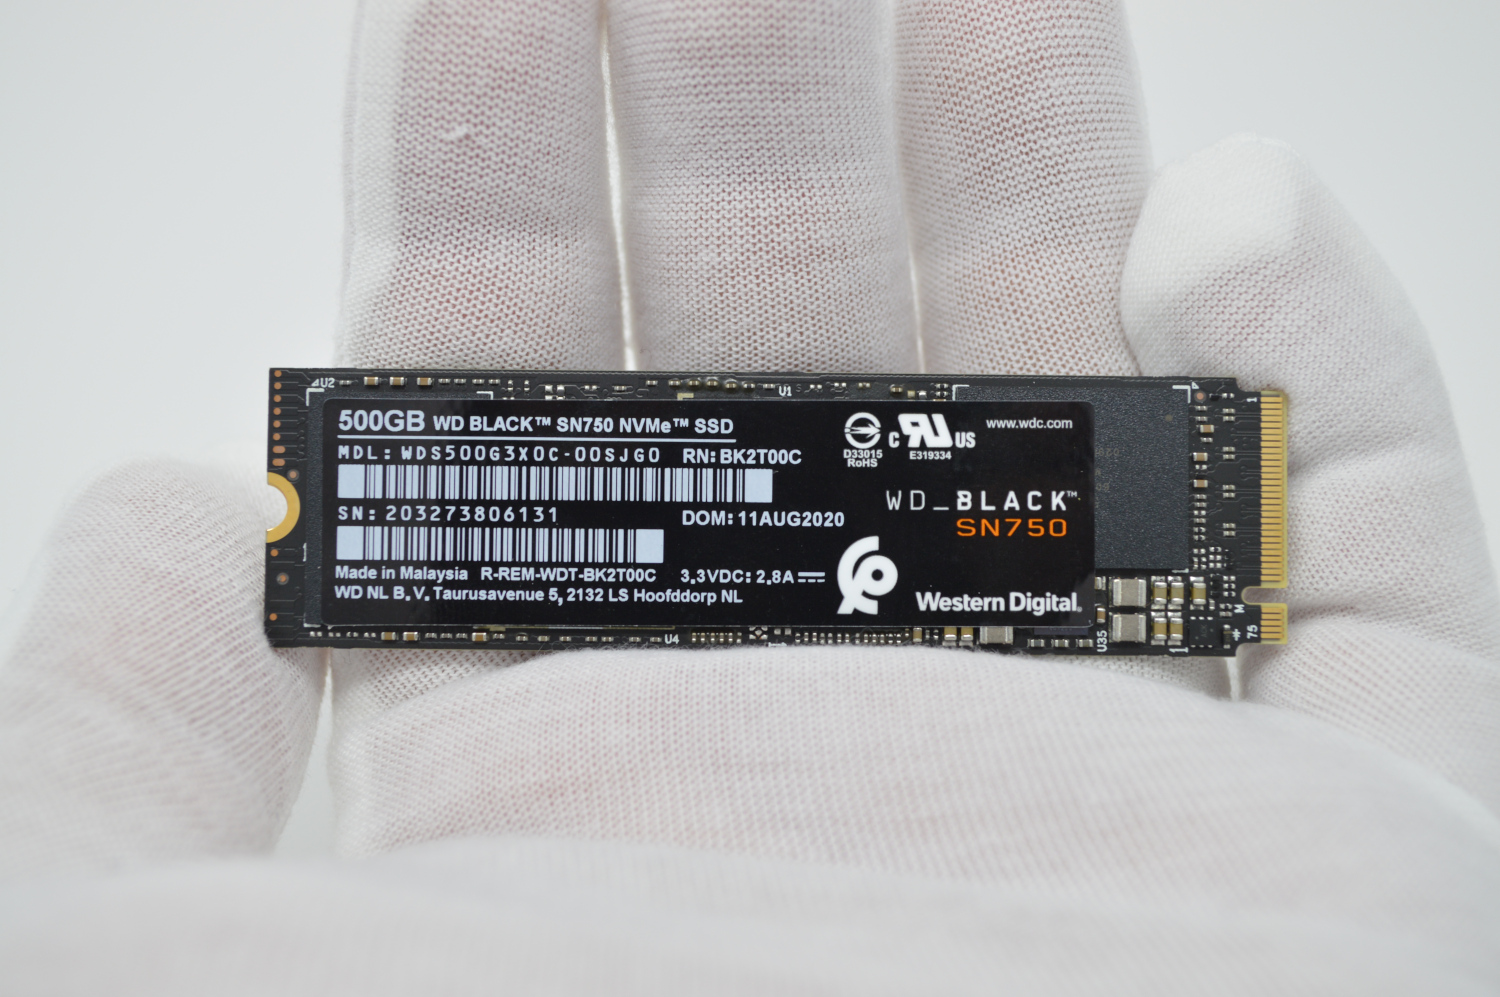 Engaged Moderate Anonymous WD Black SN750 500GB NVMe SSD Review - ServeTheHome